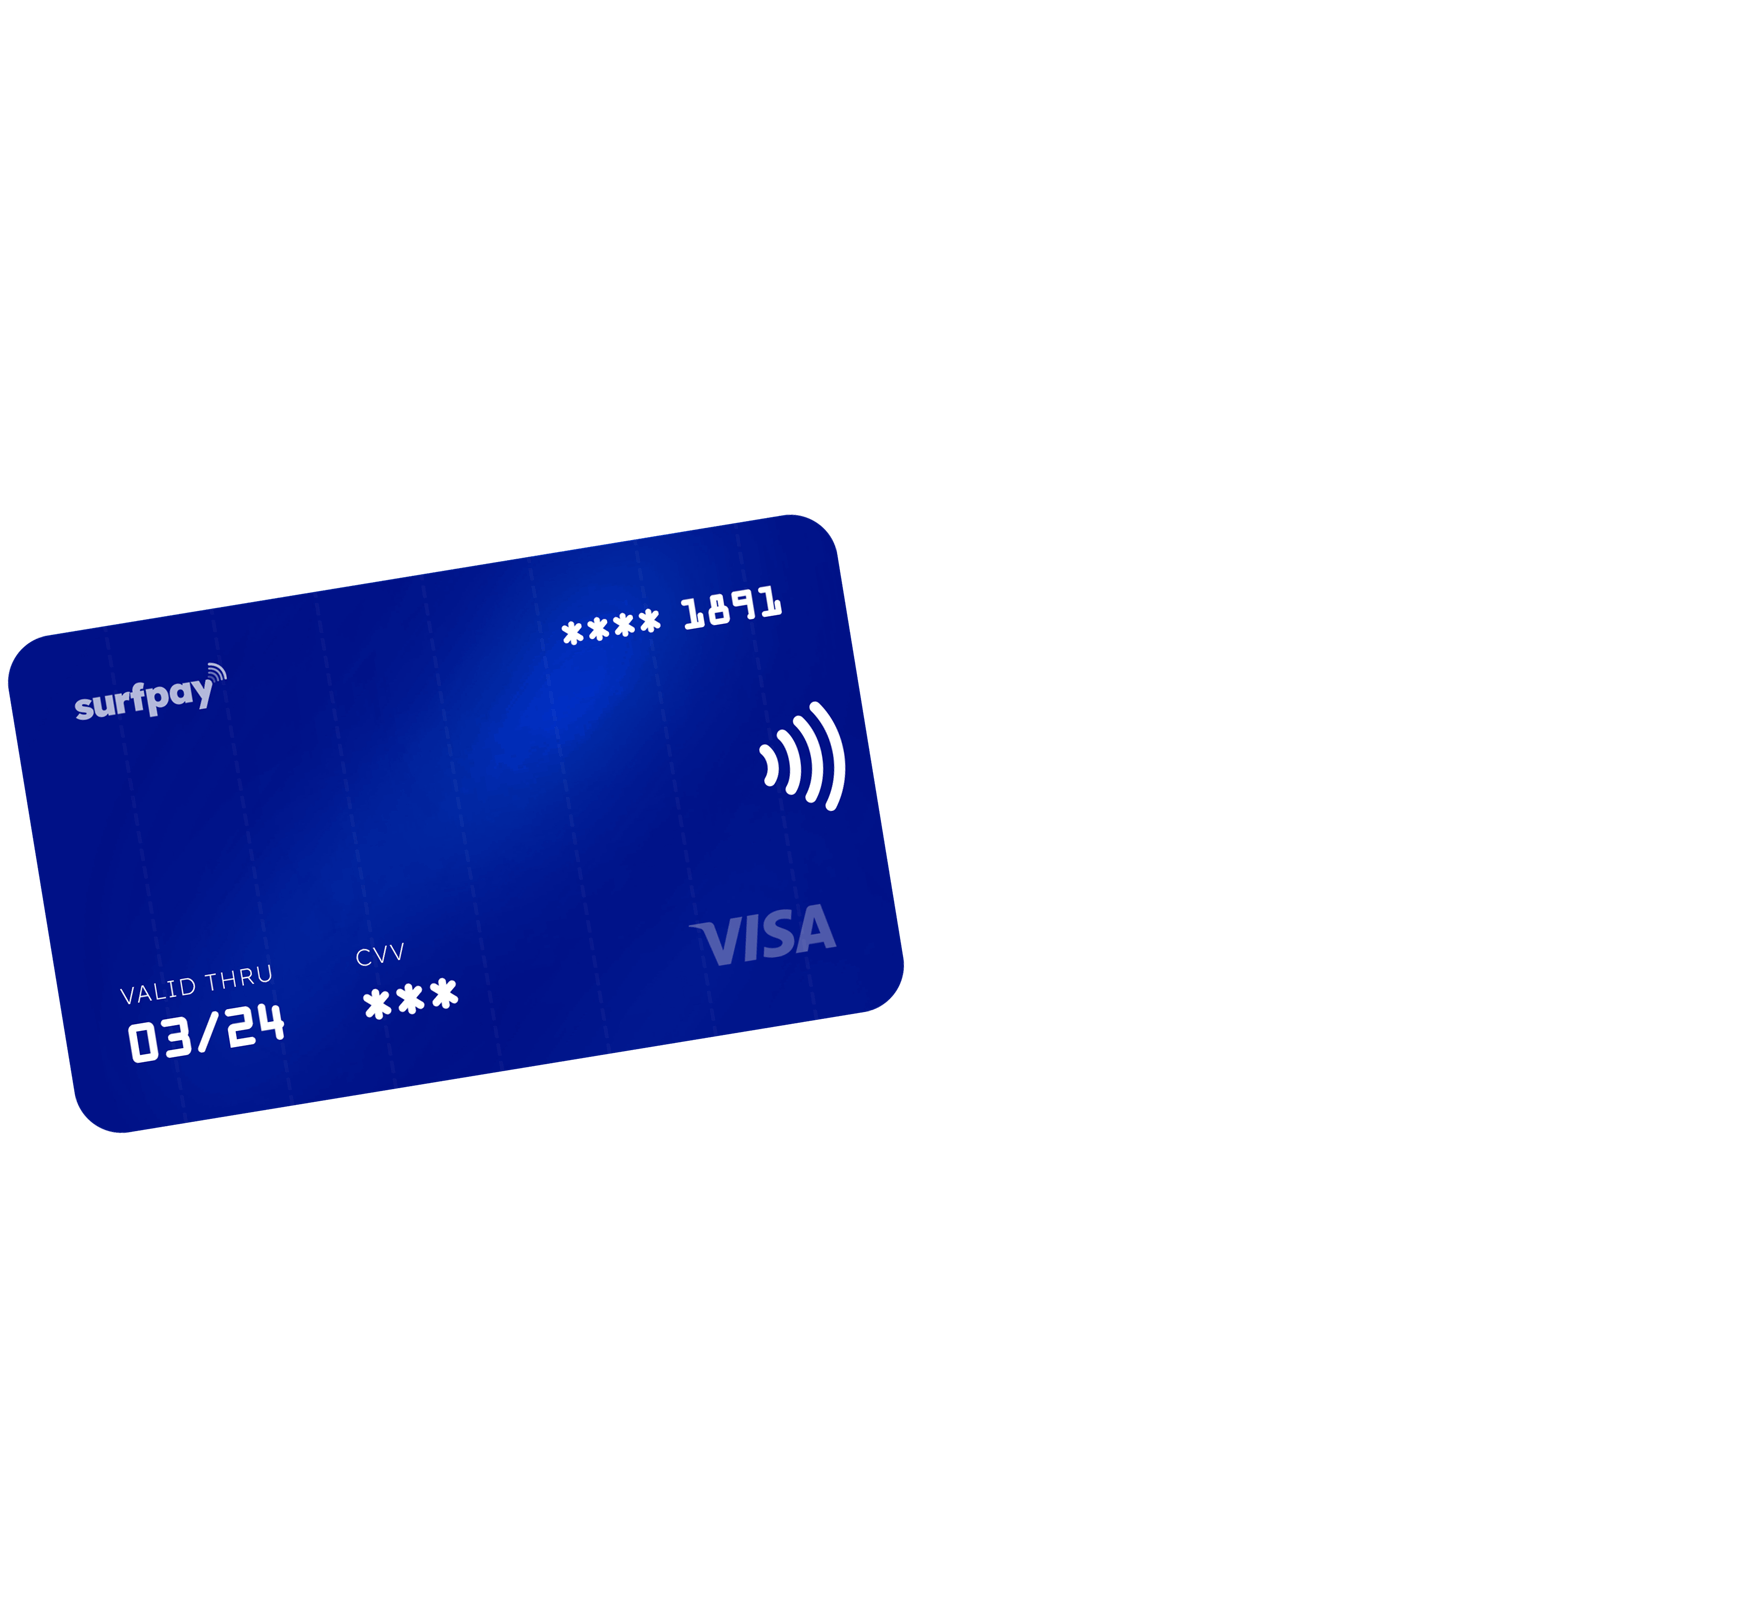 💳 The SurfTouch terminal